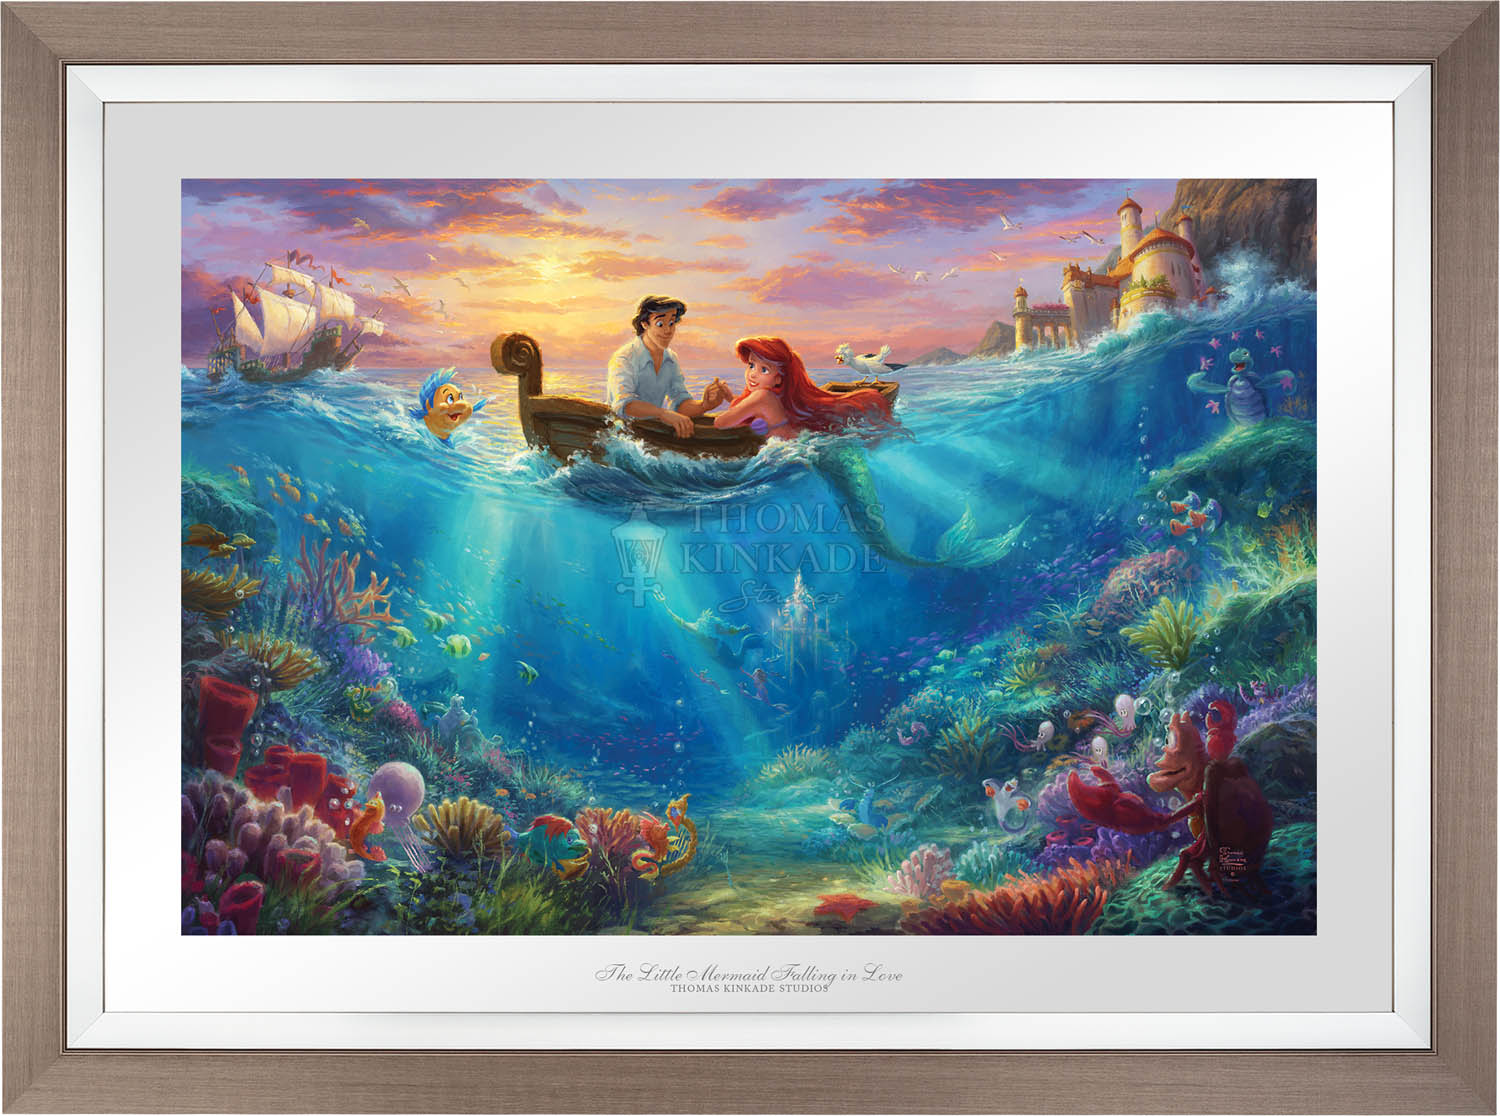  Prince Eric comes out to meet Ariel on a small rowboat, as all the sea creatures look on - Space Gray Frame.